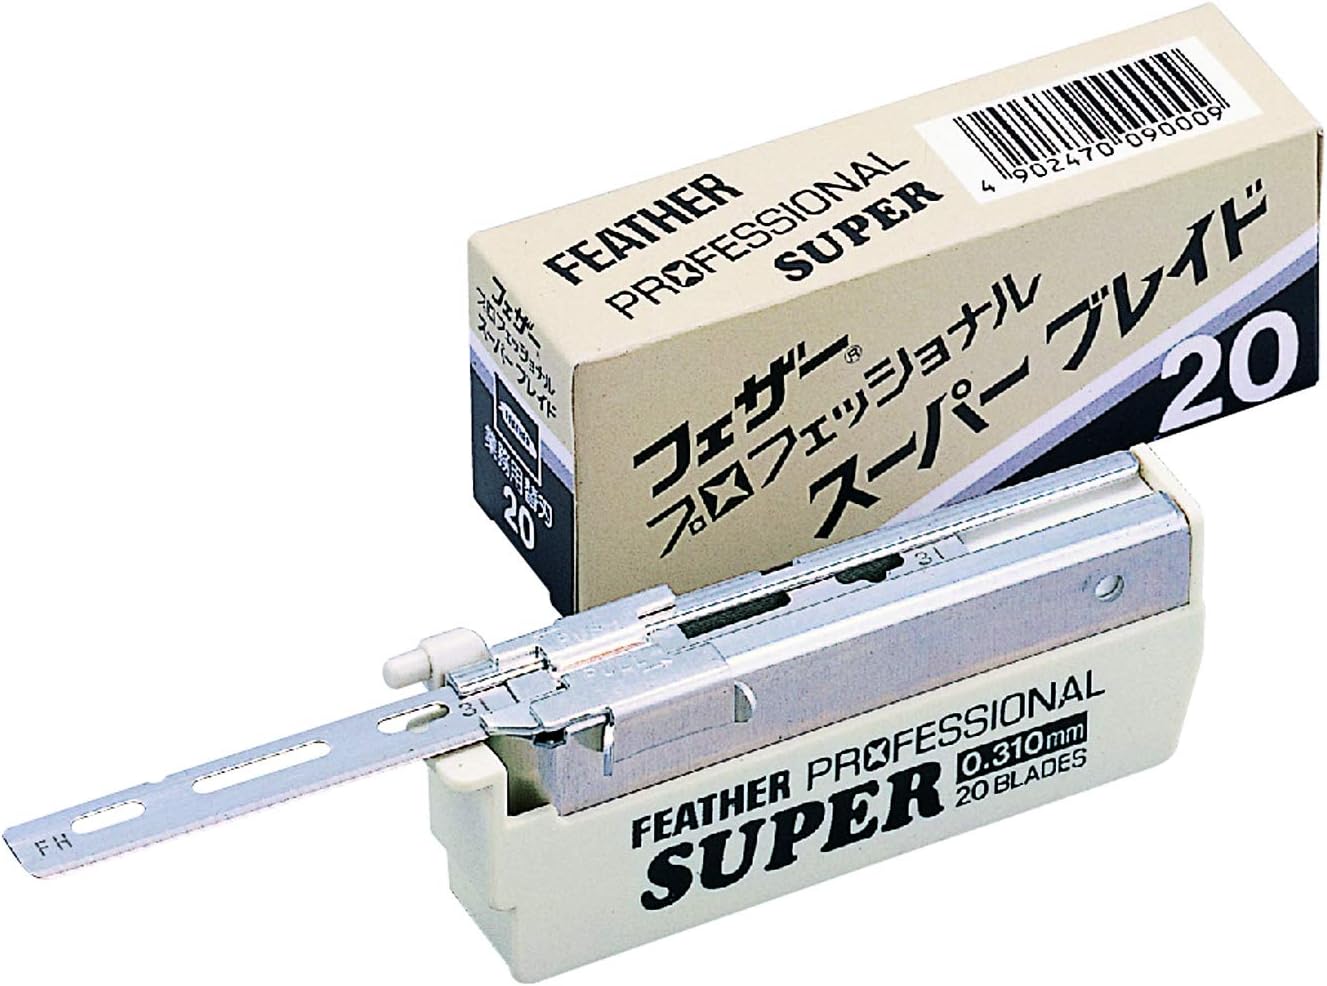 FEATHER PROFESSIONAL SUPER BLADES - 20 BLADE PACK